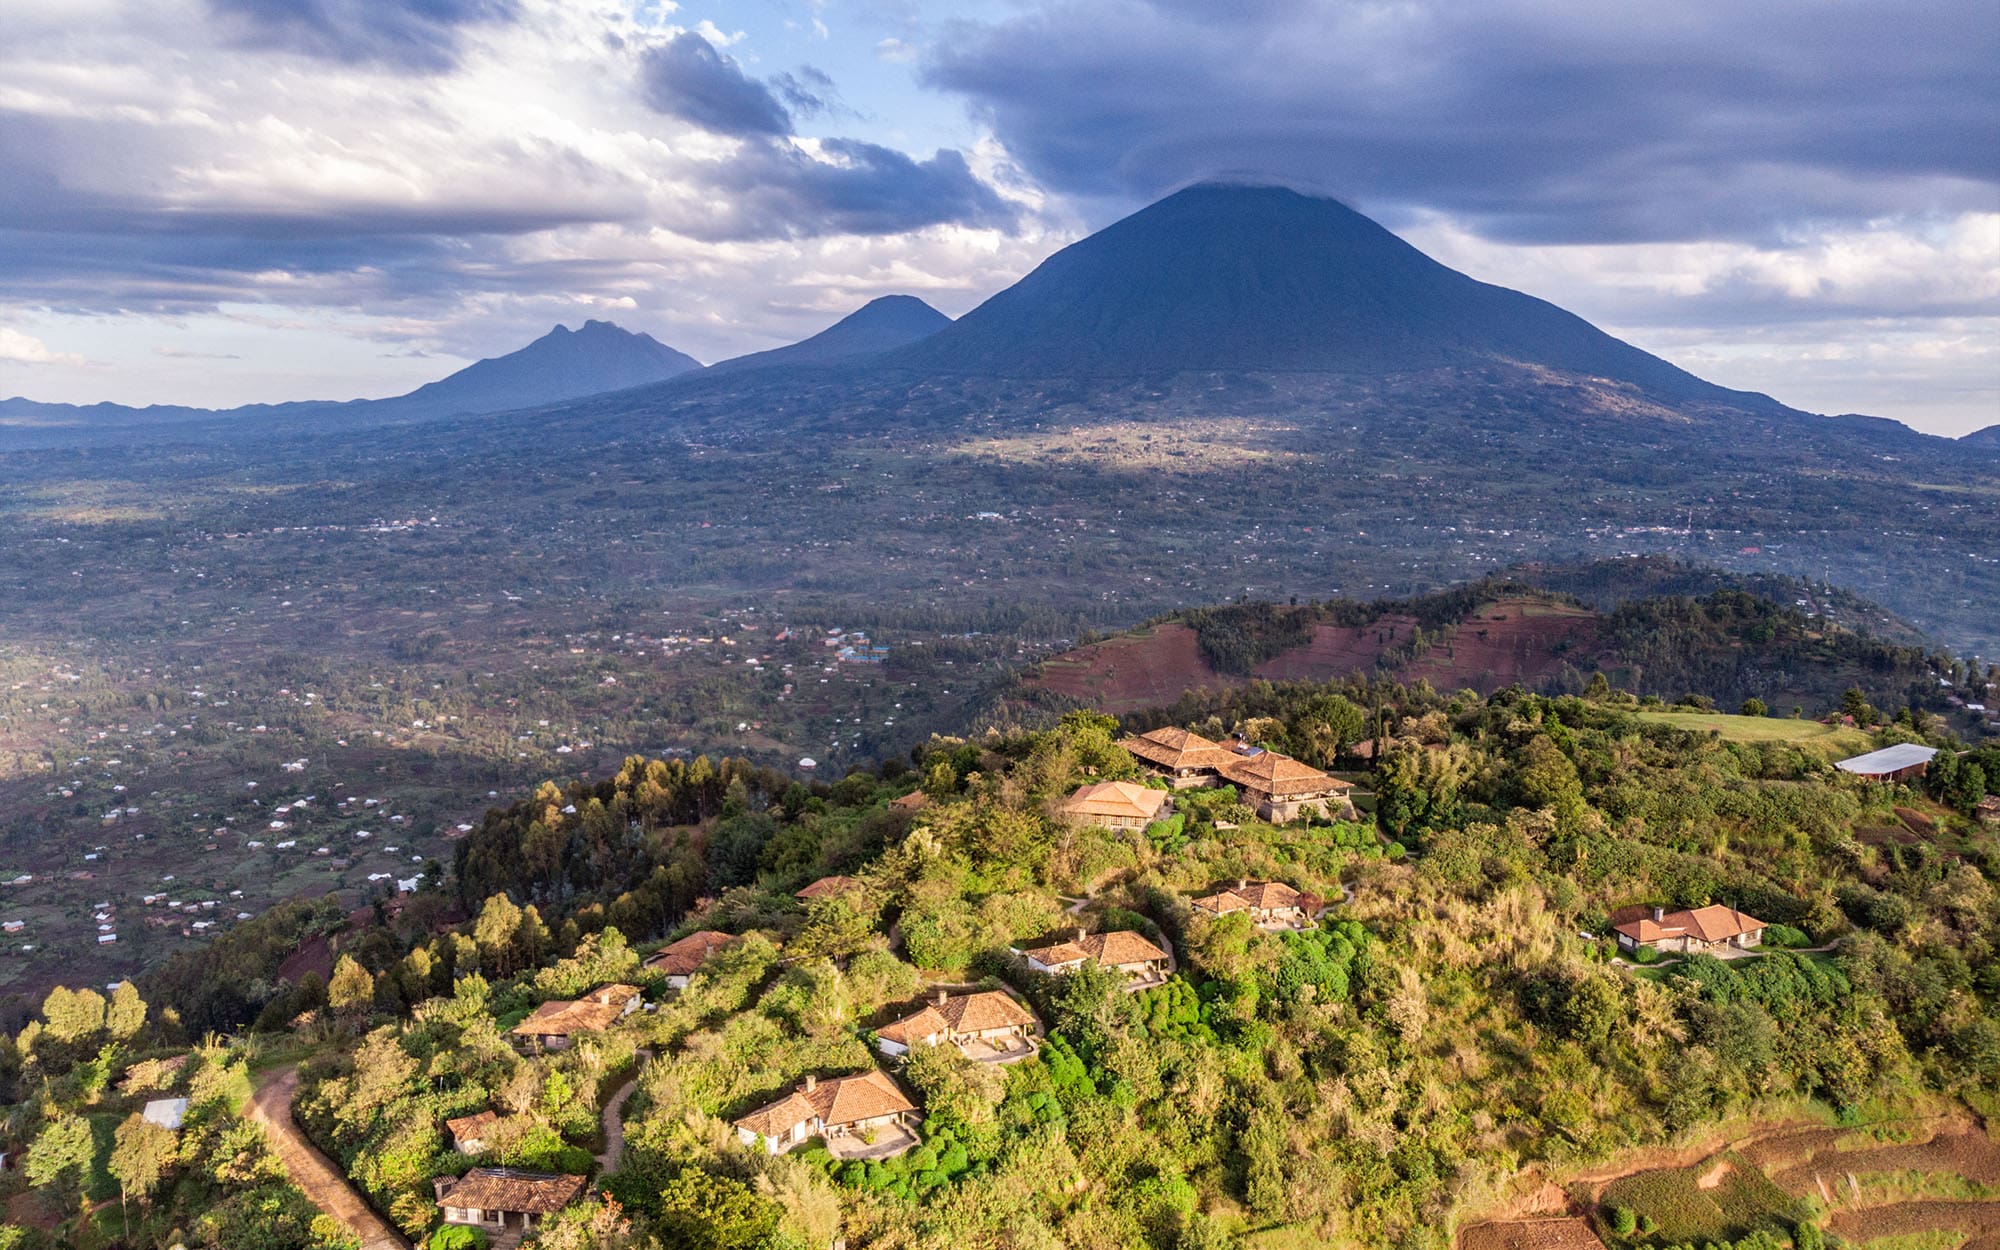 Enjoy the finest views in Africa, overlooking the Virunga Volcanoes and the Musanze valley to the west and Lake Bulera and Ruhondo to the east. 